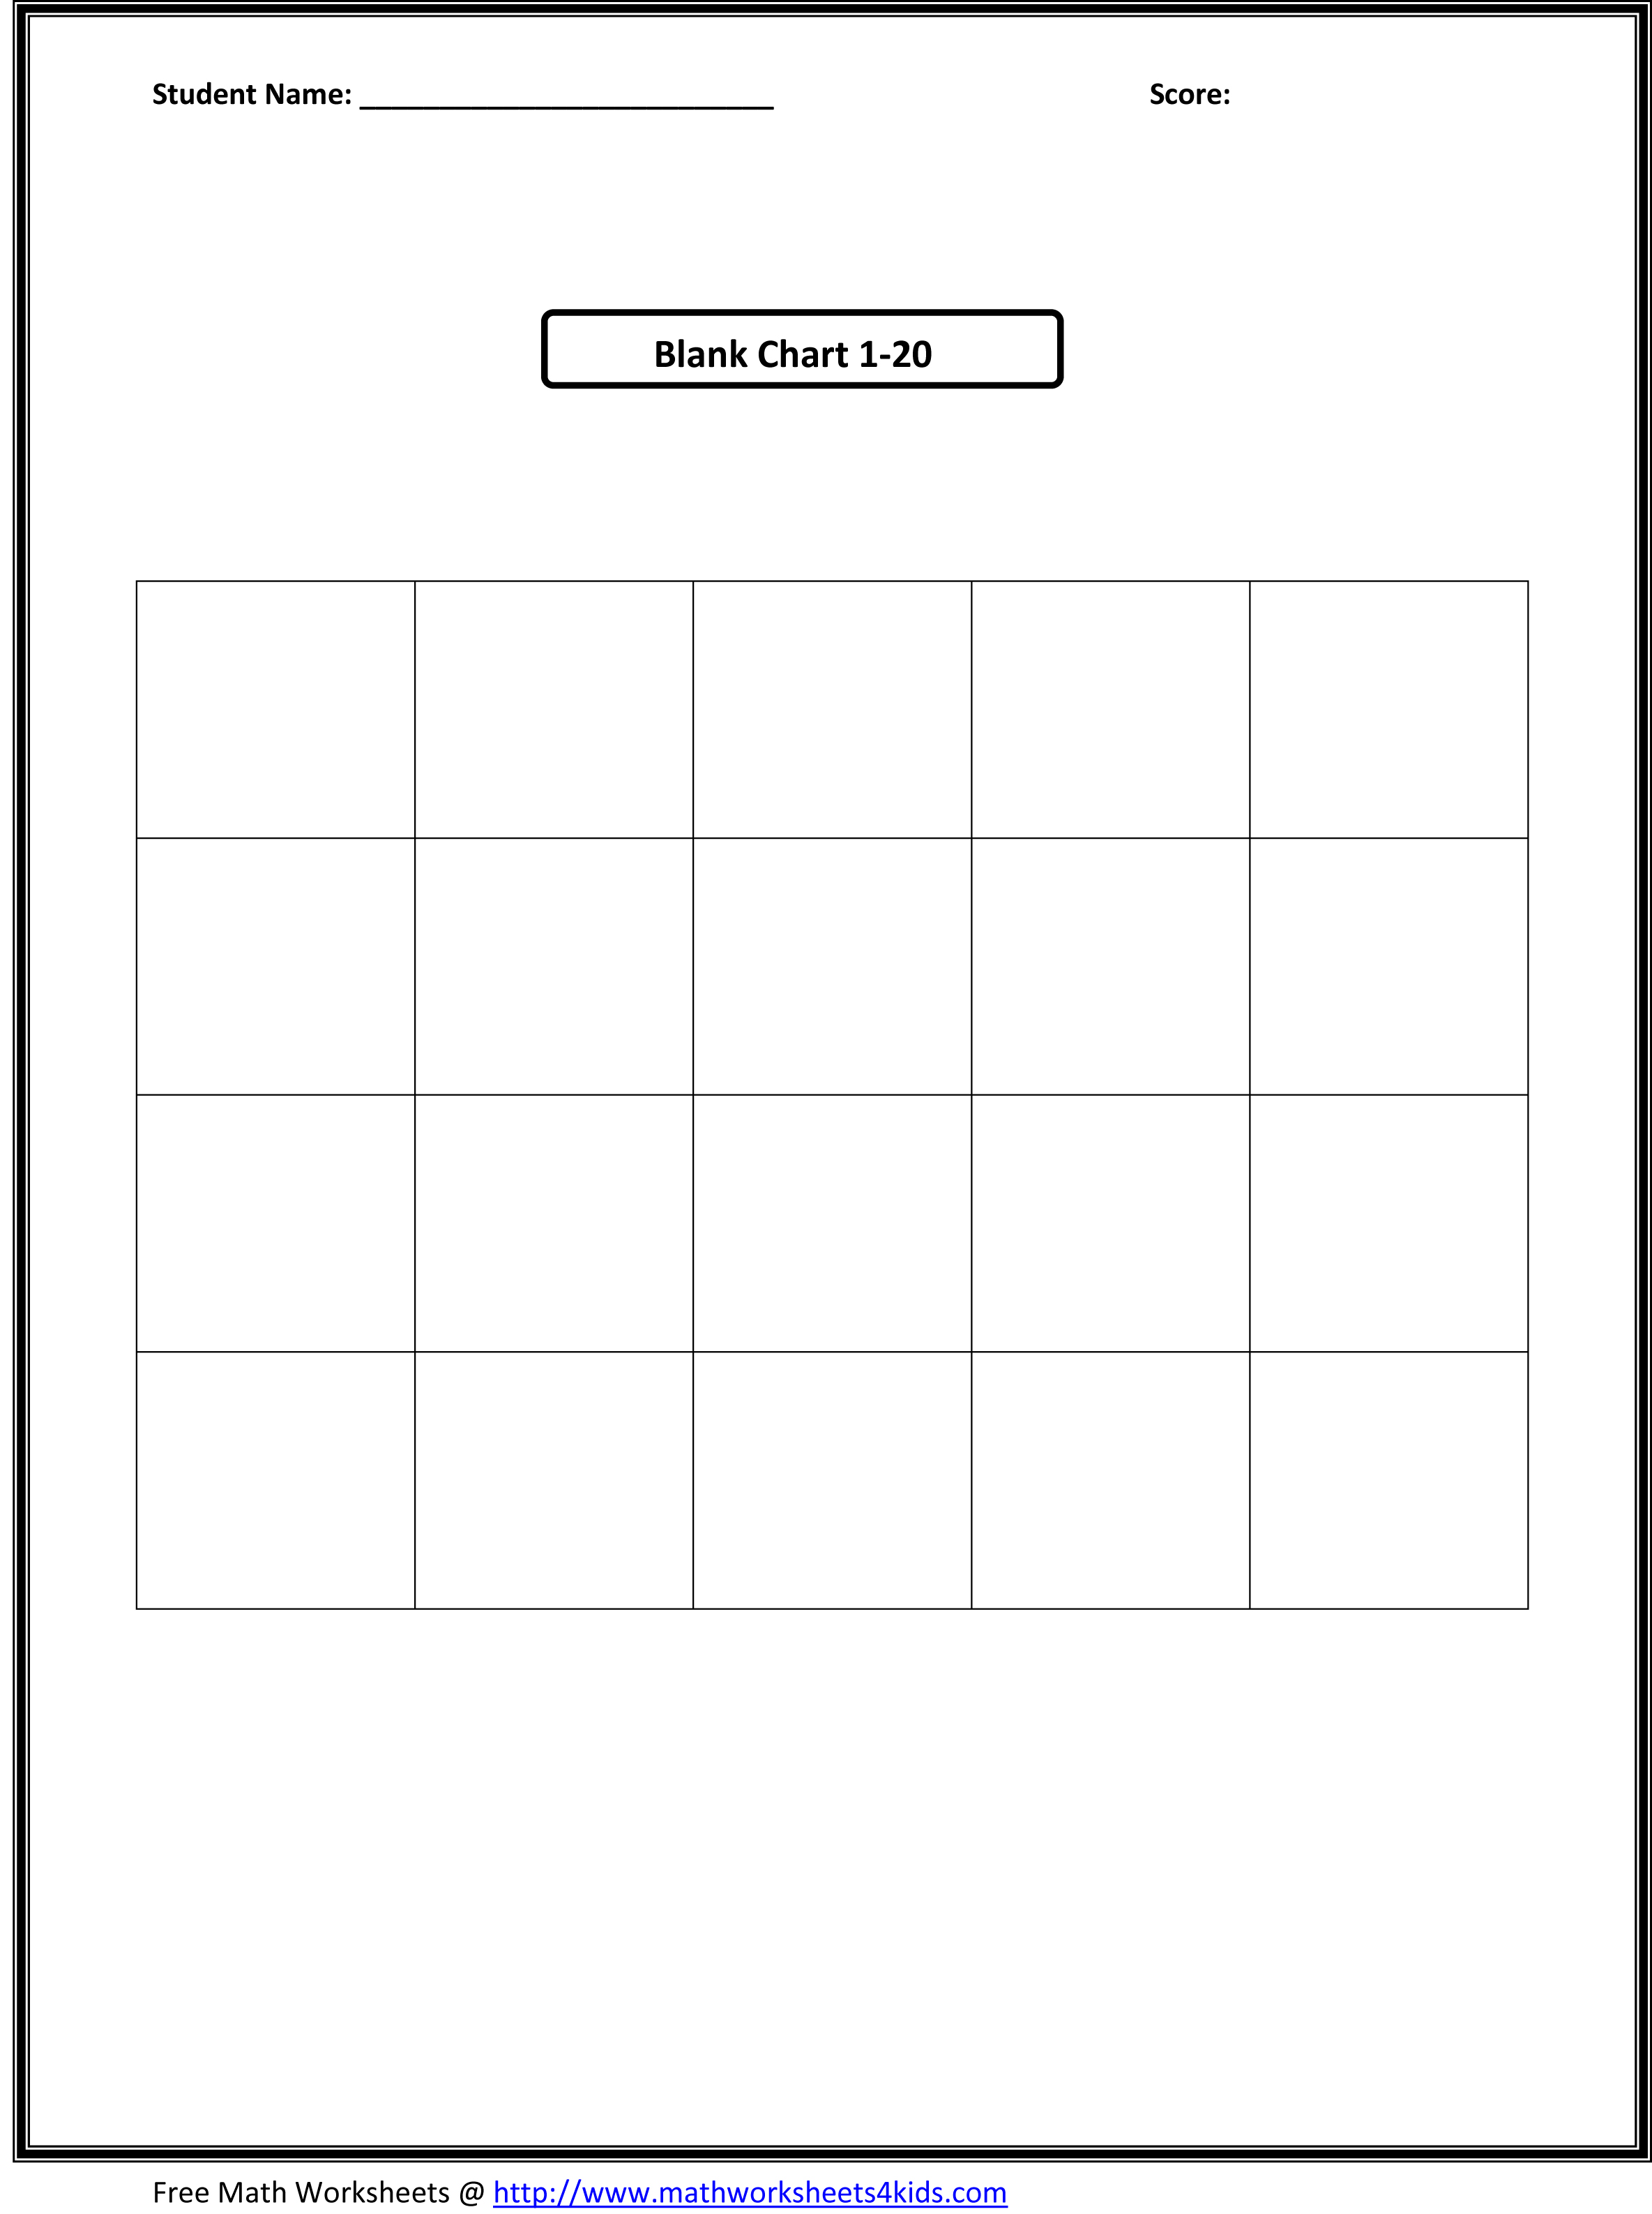 13 Best Images of Math Worksheets Counting 1 20 - Blank ...